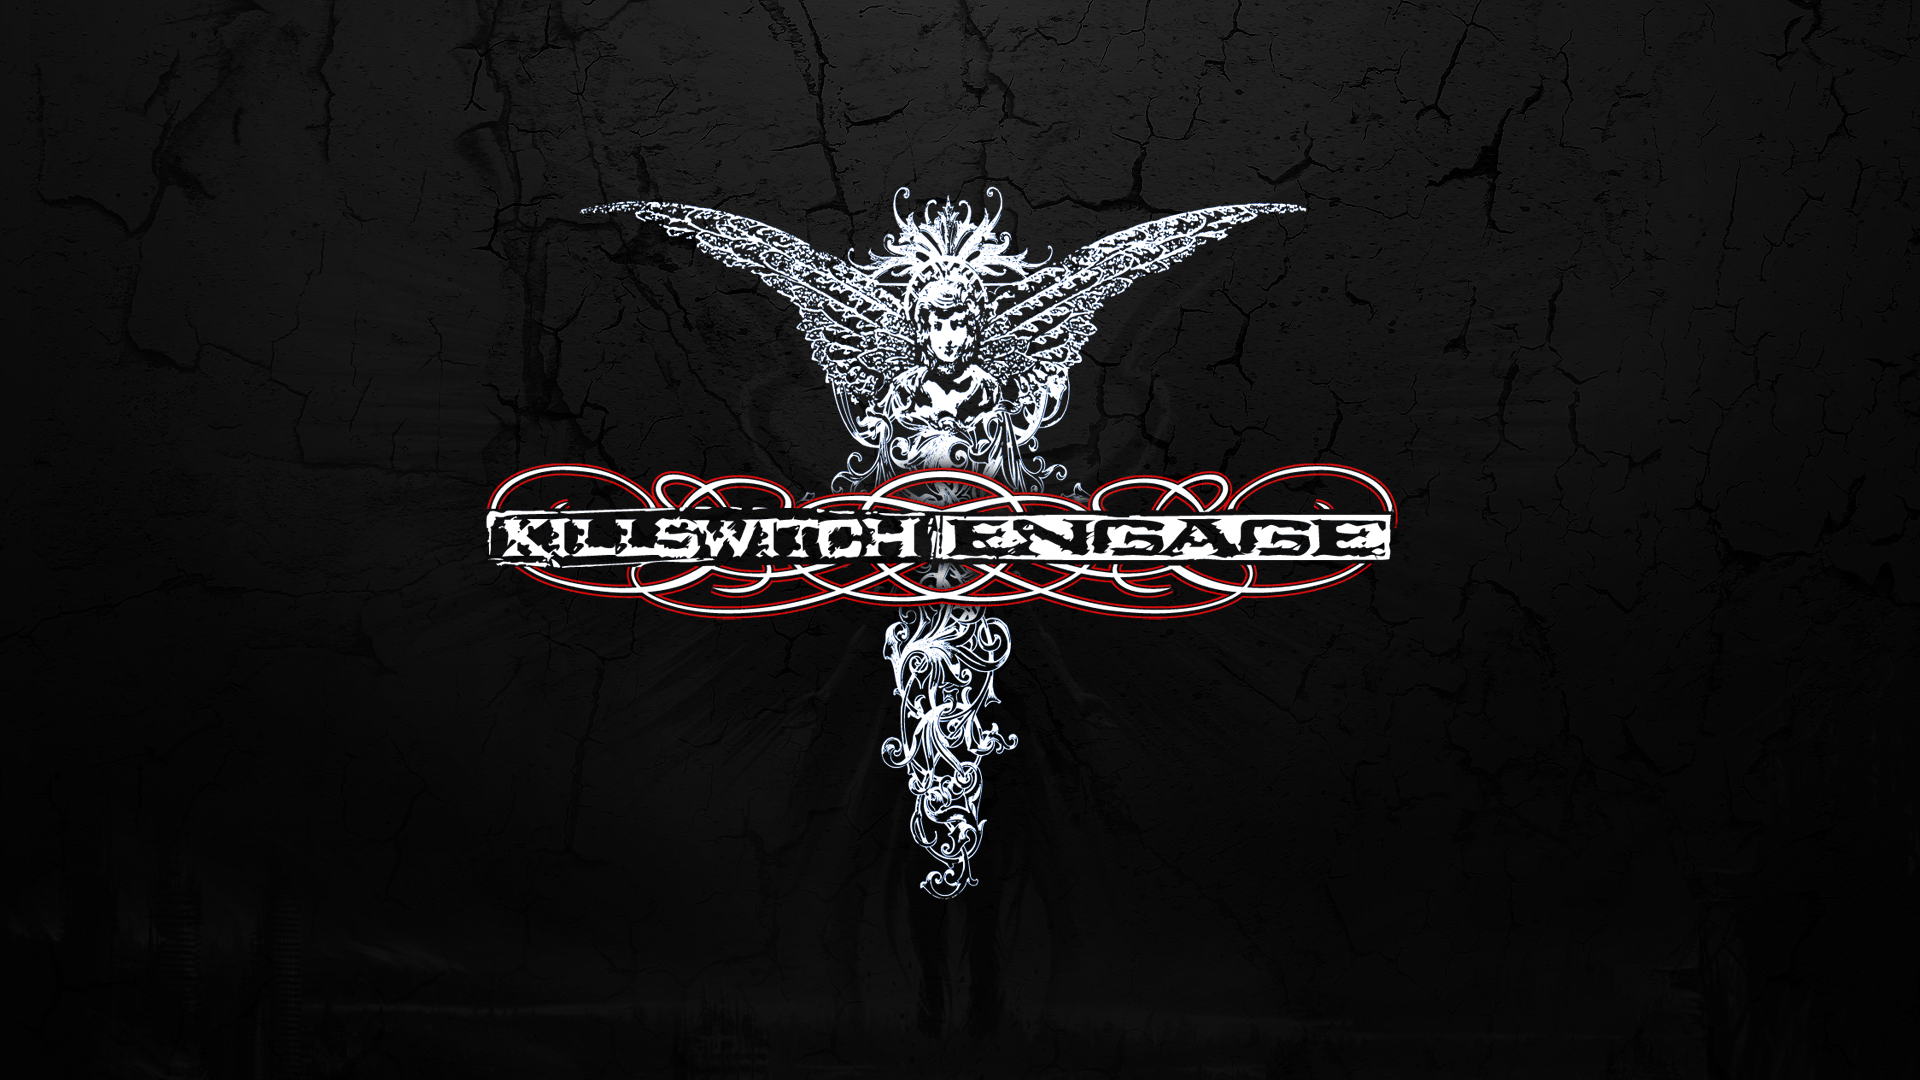 Killswitch Engage Heavy Metal Wallpaper Background